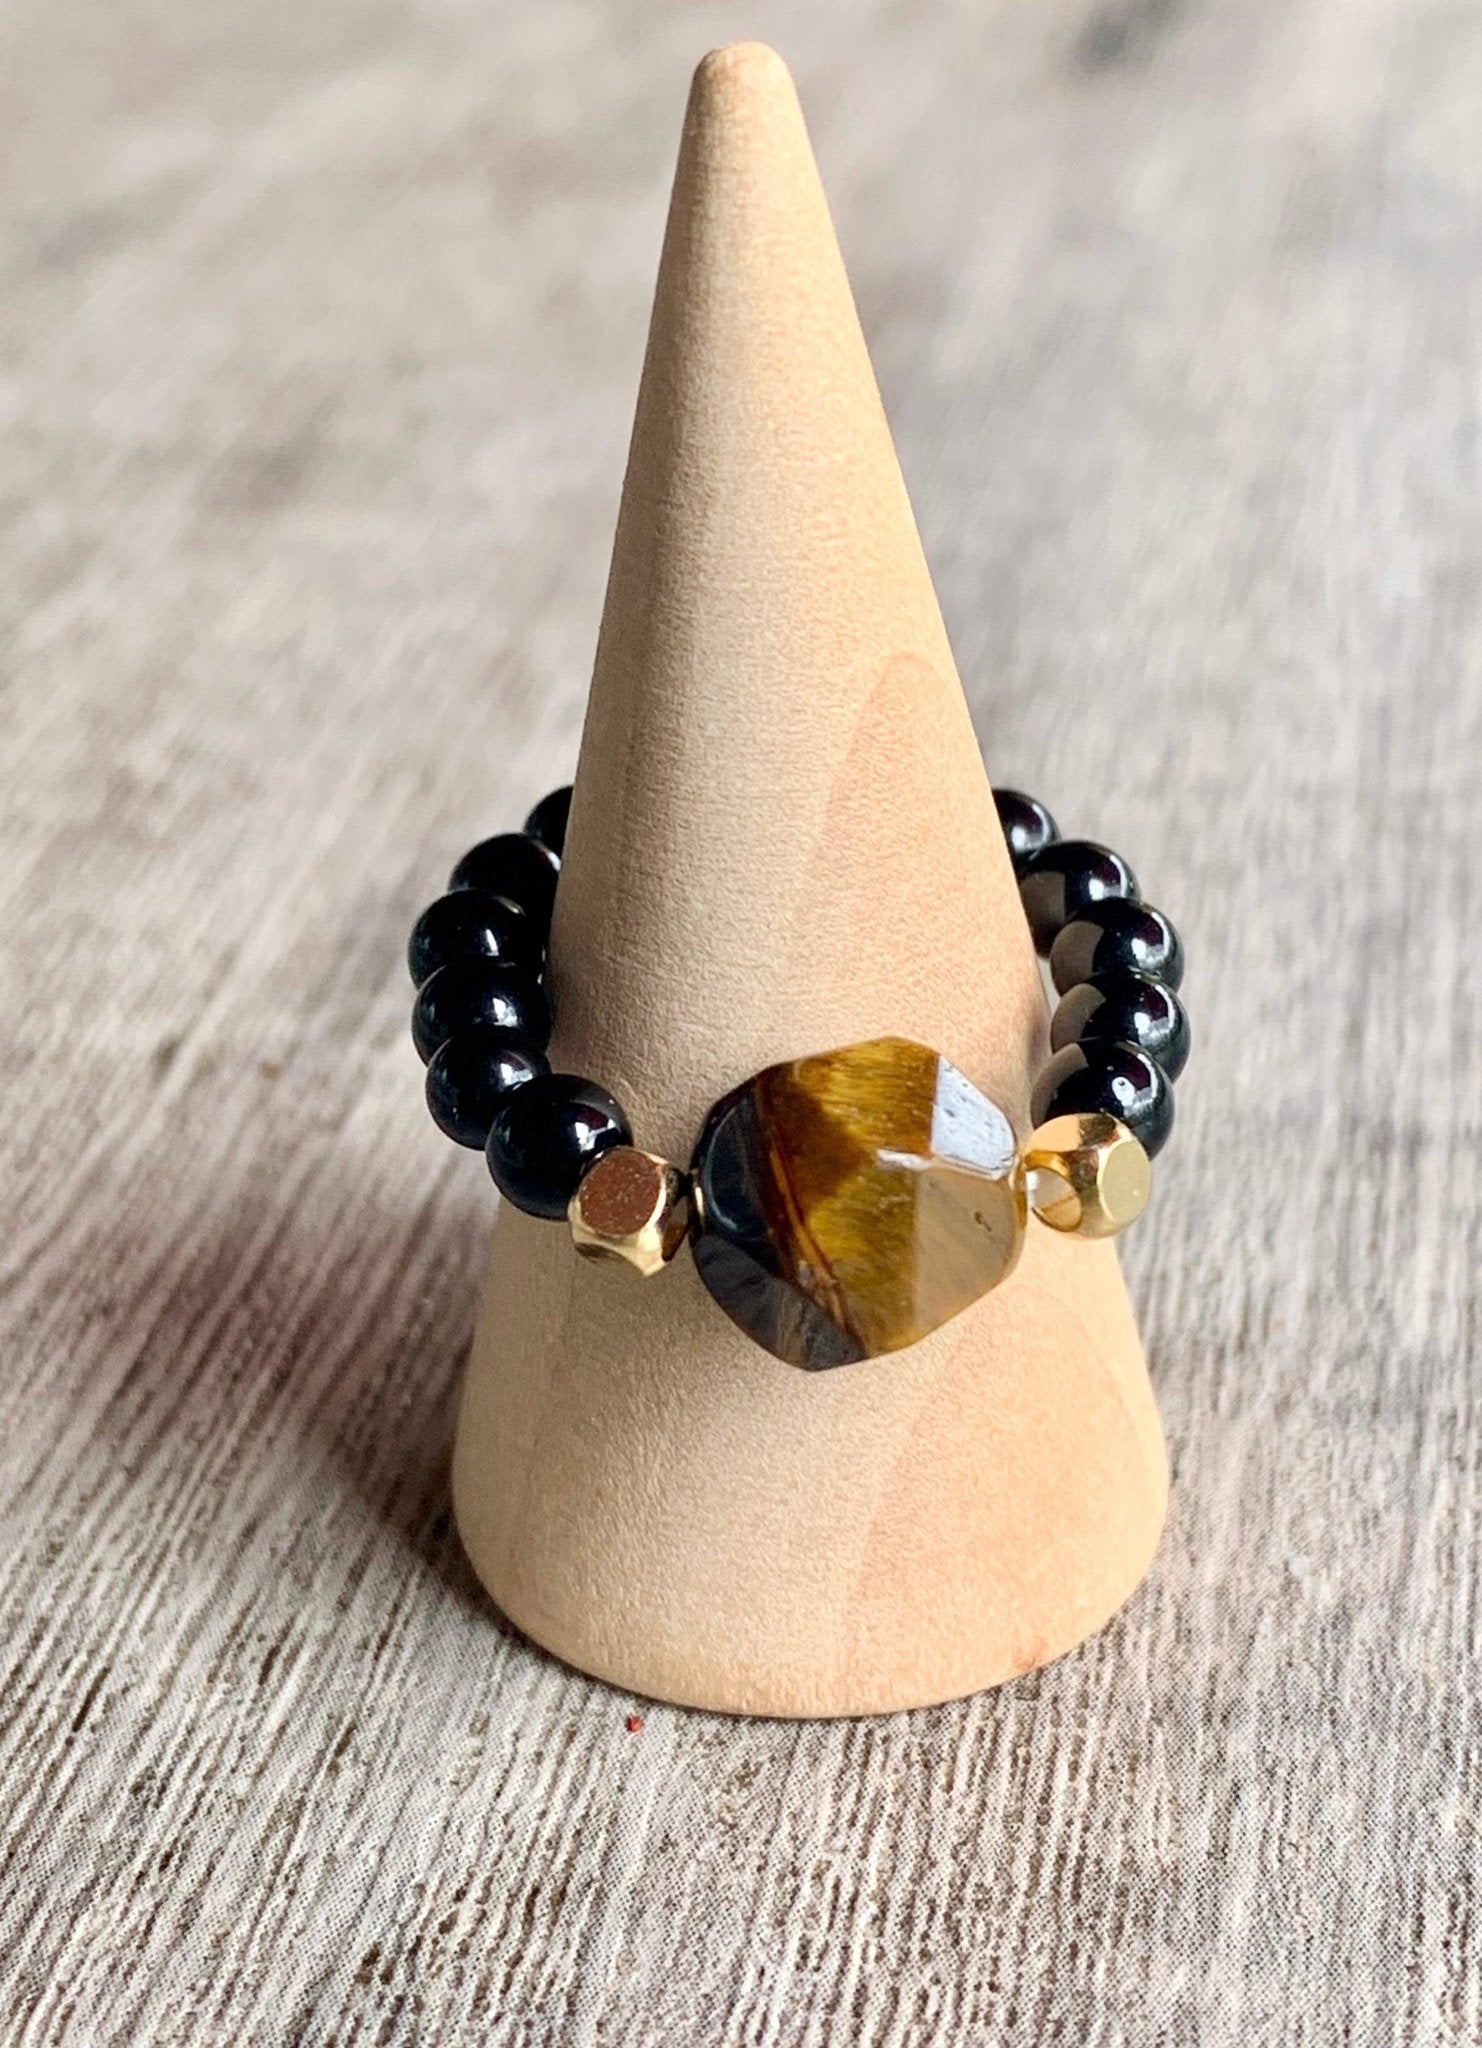 🔴SOLD🔴 Sparky Handmade Black Tourmaline and Tiger's Eye Expandable Ring - Born Mystics